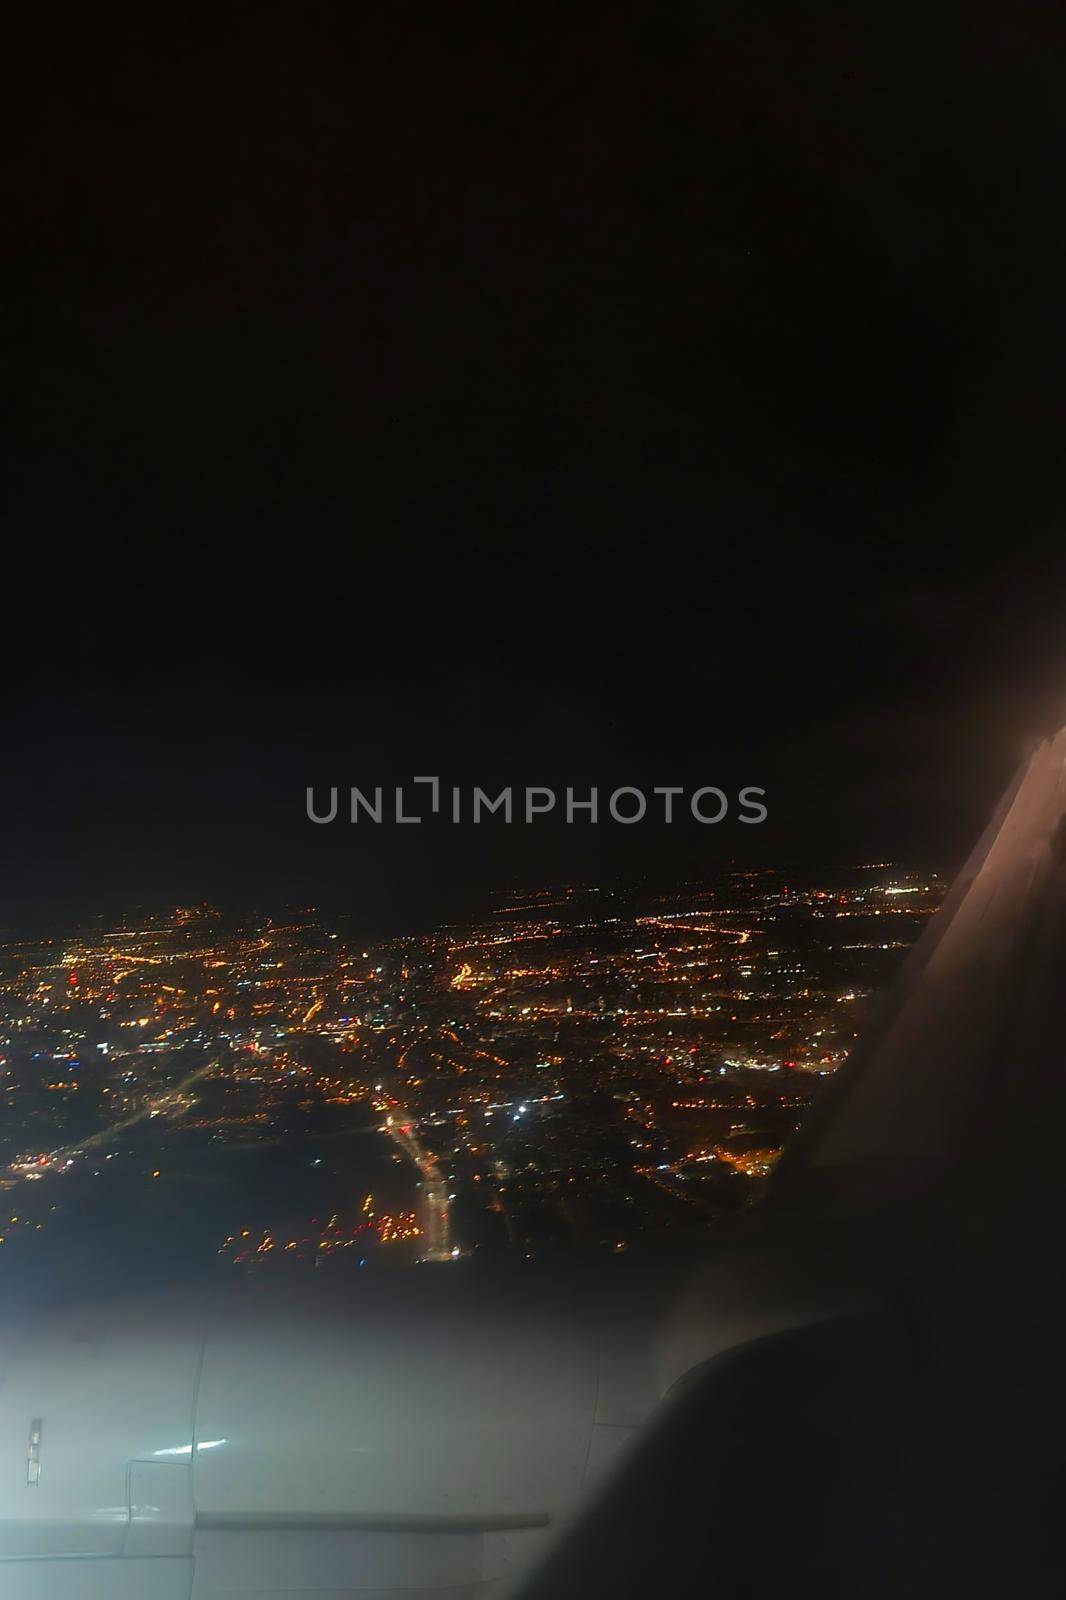 View of the night glowing city from a flying plane